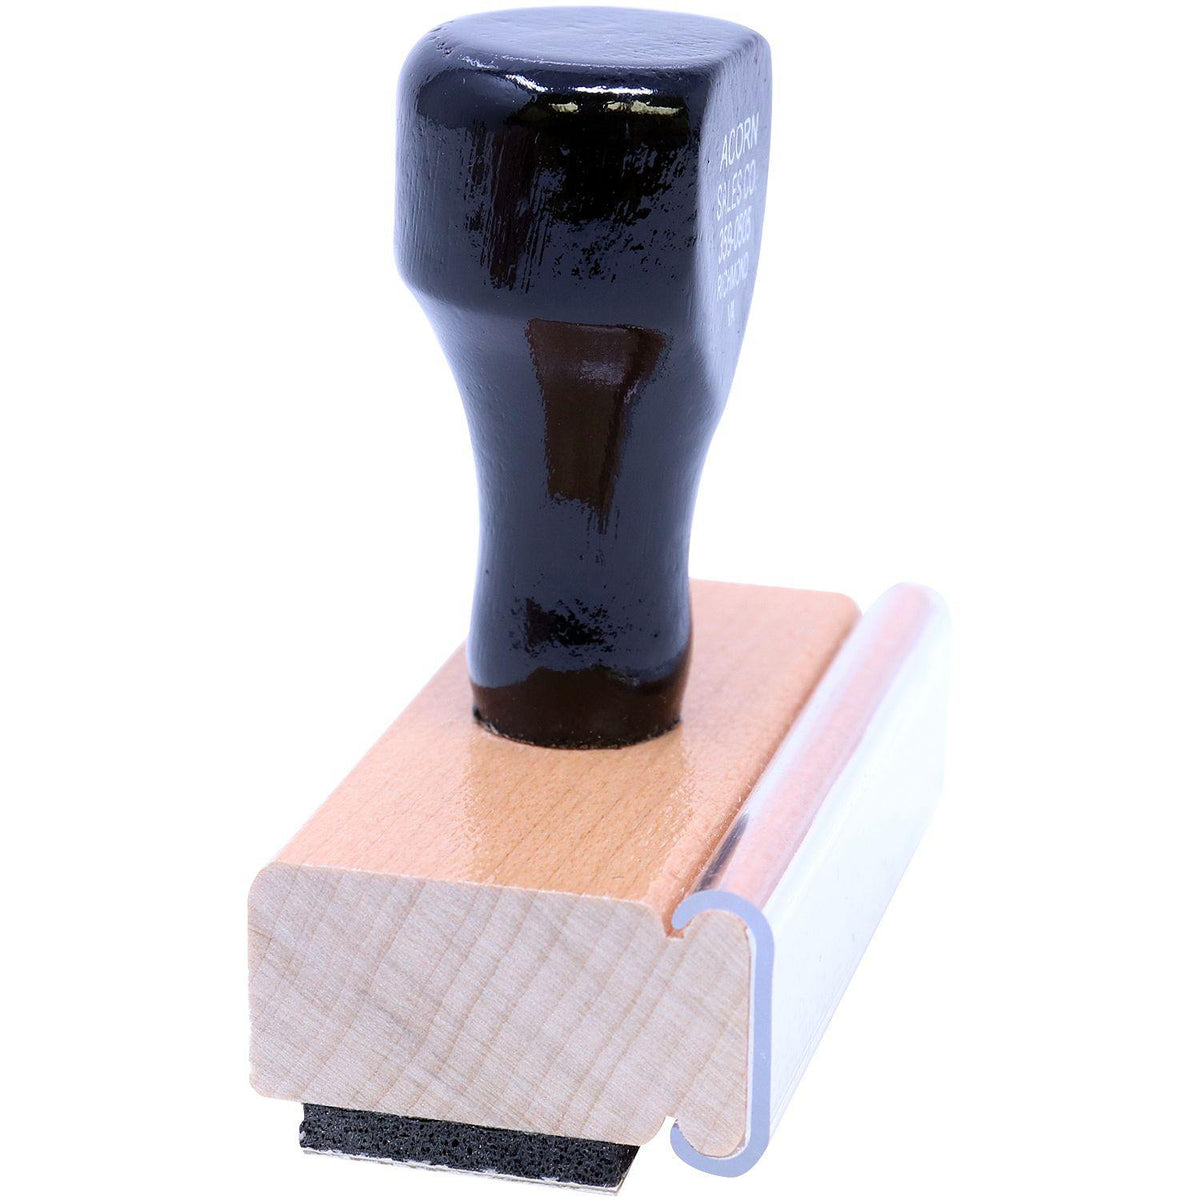 Side View of Large Of Rubber Stamp at an Angle